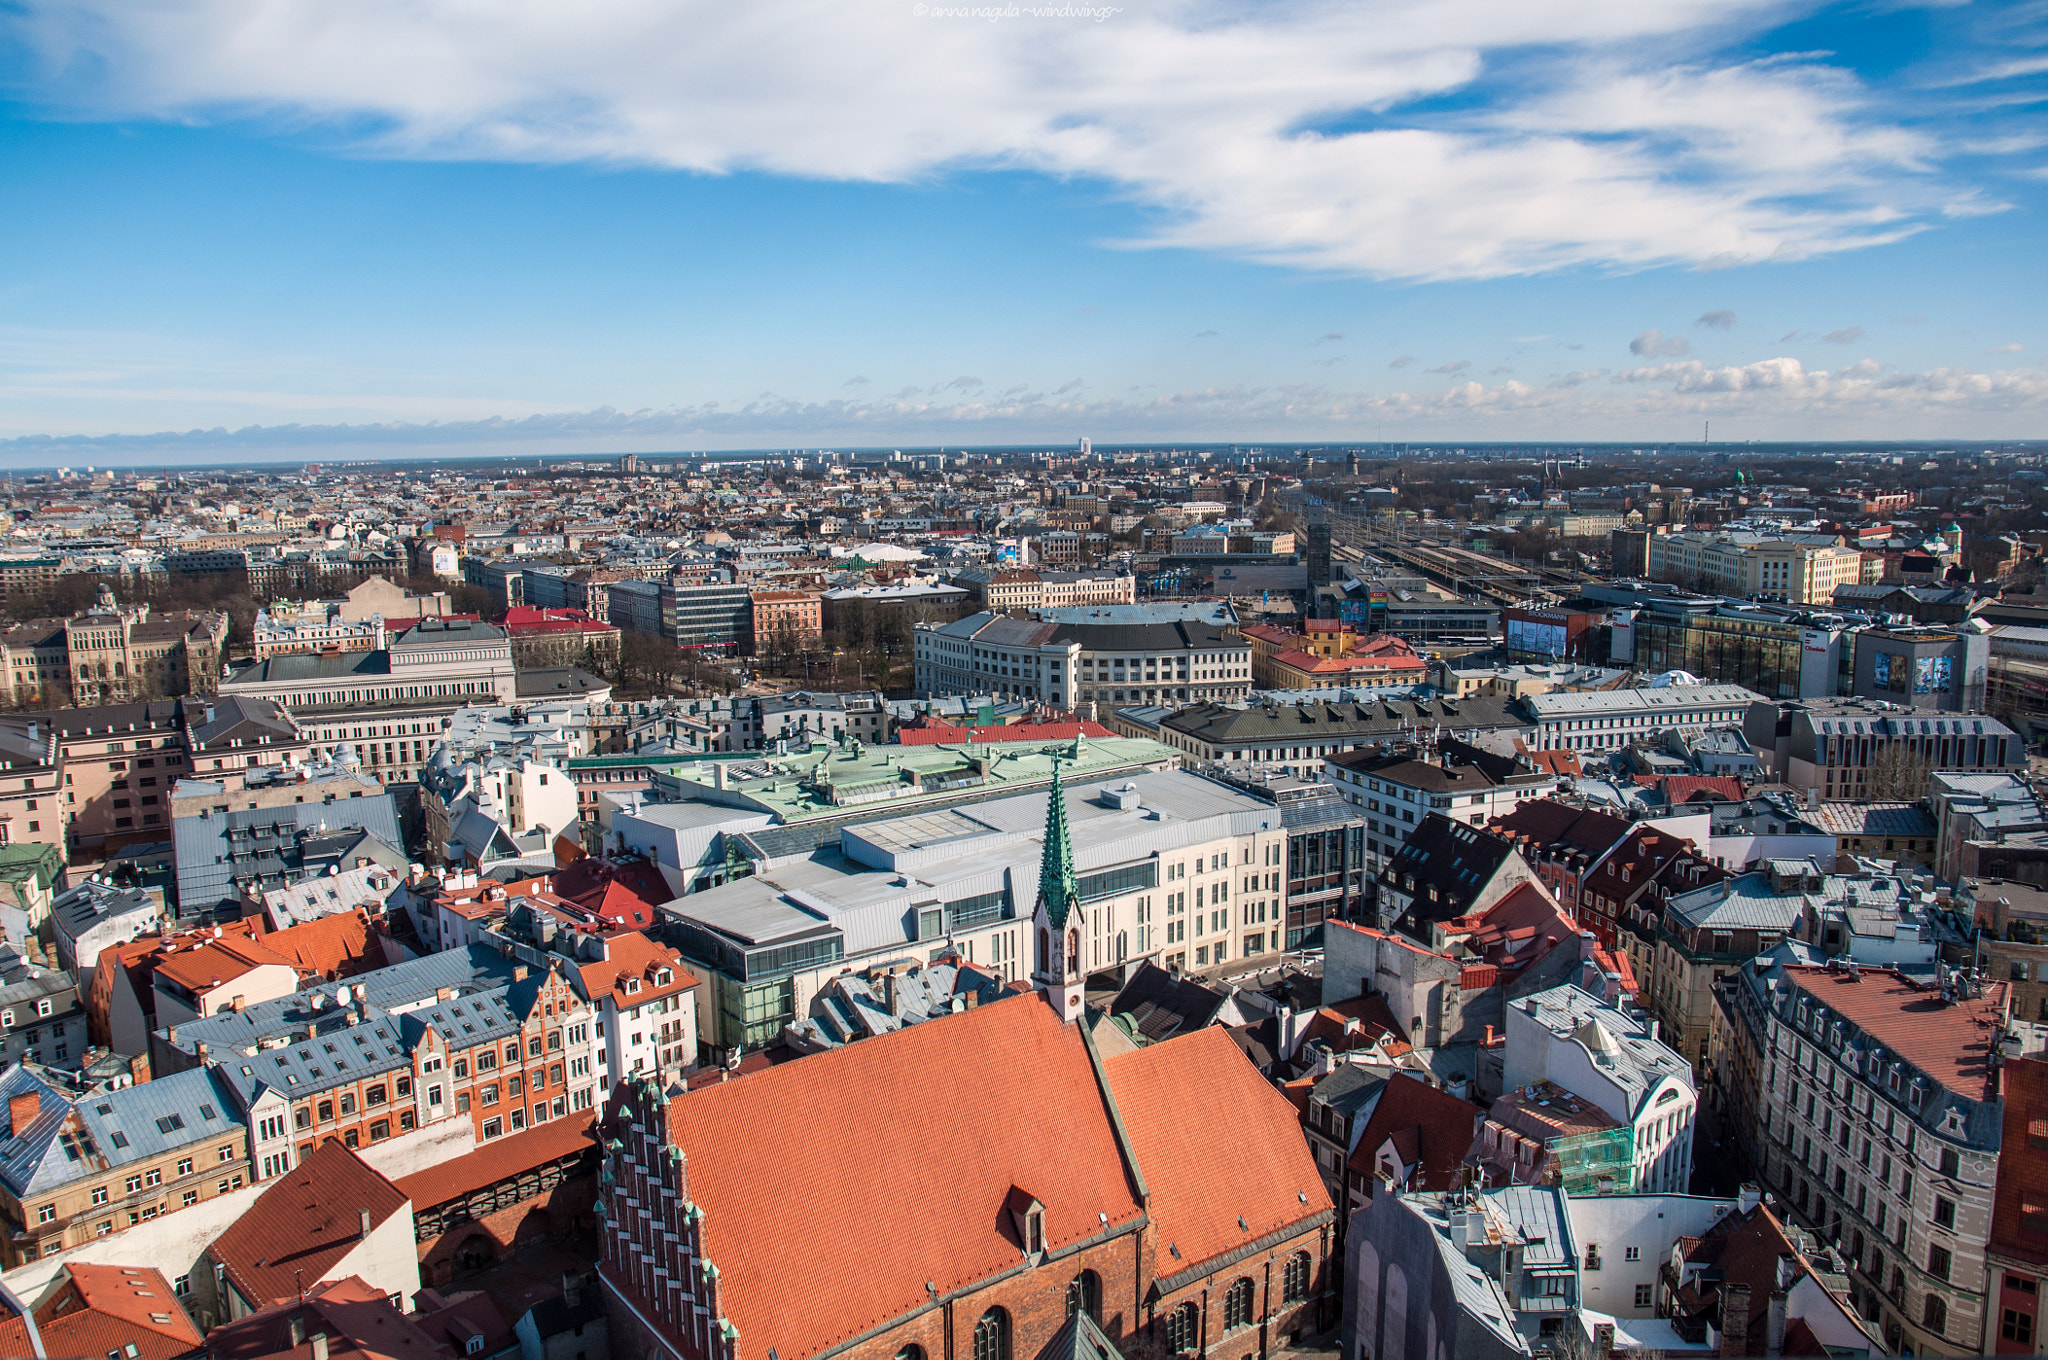 Nikon D90 + Sigma 17-70mm F2.8-4 DC Macro OS HSM | C sample photo. Old riga, view from saint peter cathedral photography